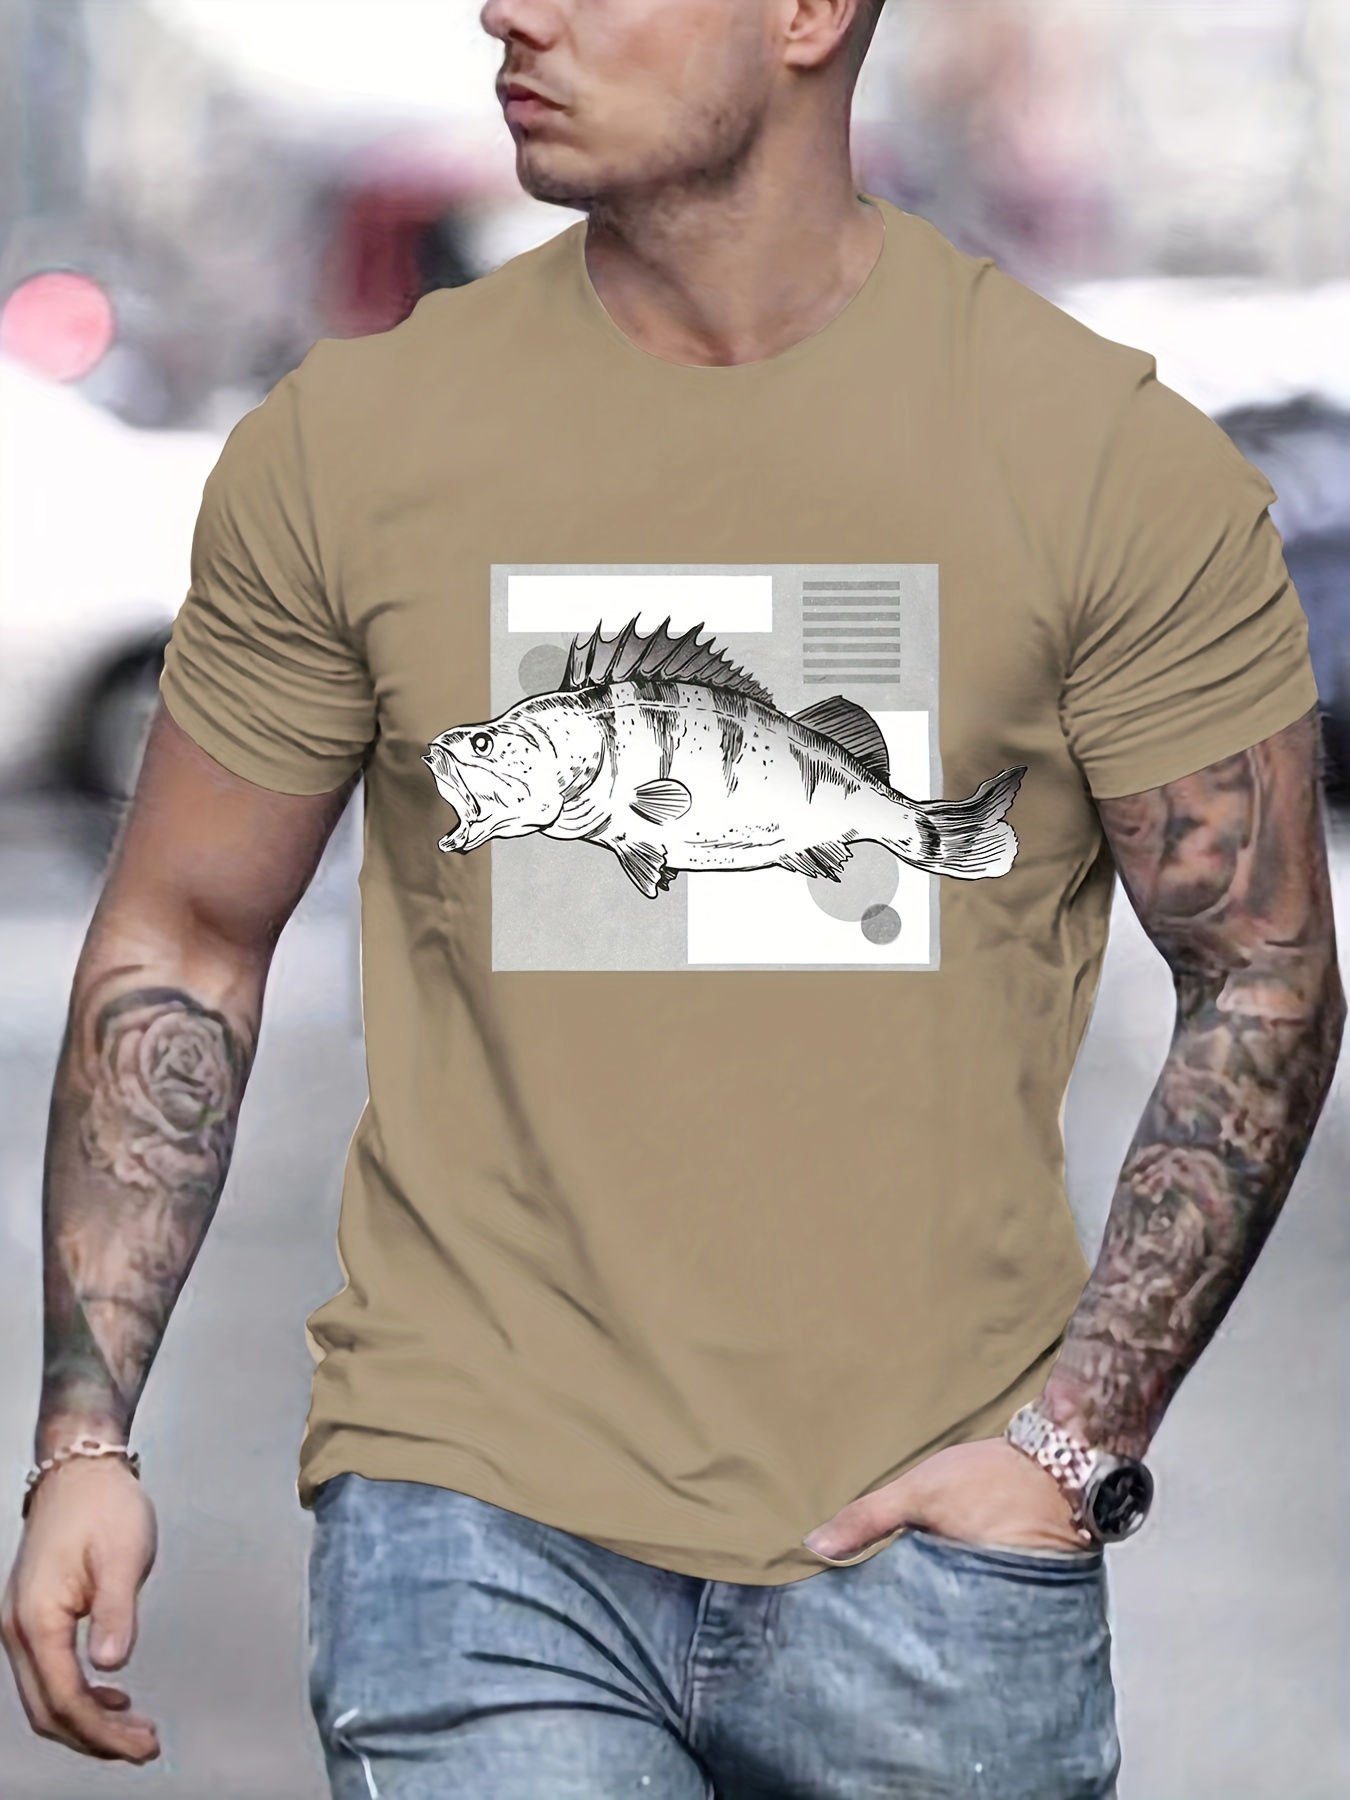 Solid Crew Neck Cotton T-Shirt, Men's Outdoor Summer Stylish Fish Pattern Print Comfy Graphic Tee Clothes Clothing Gift for Men Tops,Casual,Temu